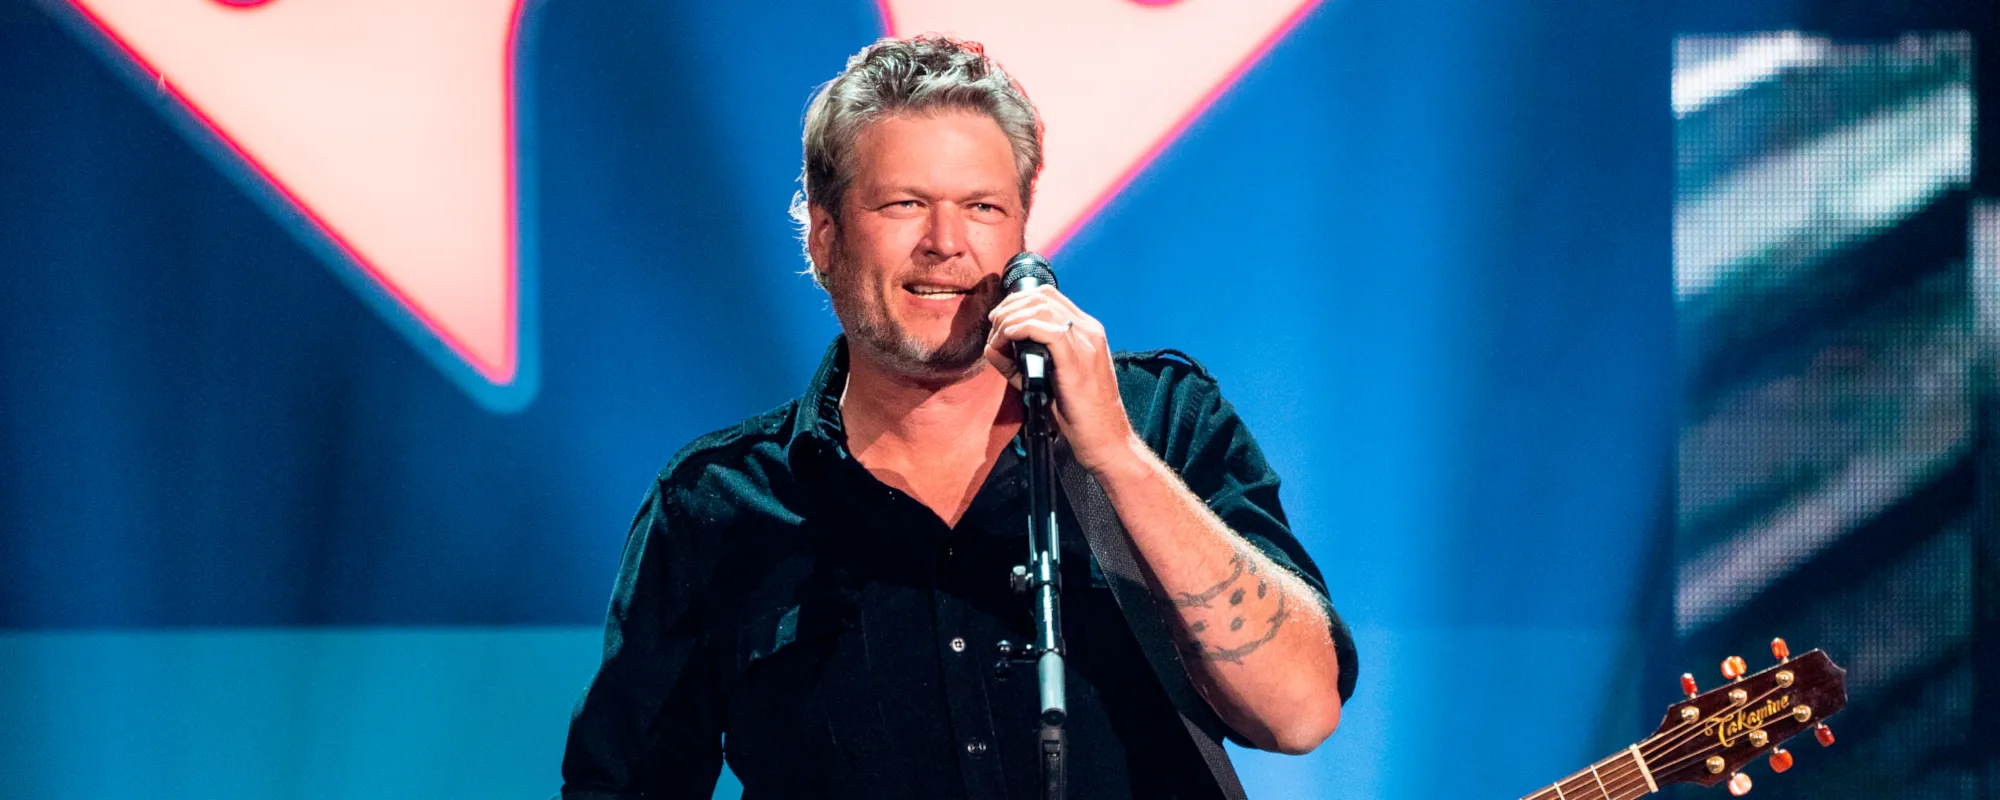 Blake Shelton, Keith Urban, and Lainey Wilson Announced as 2023 CMT Music Awards Performers